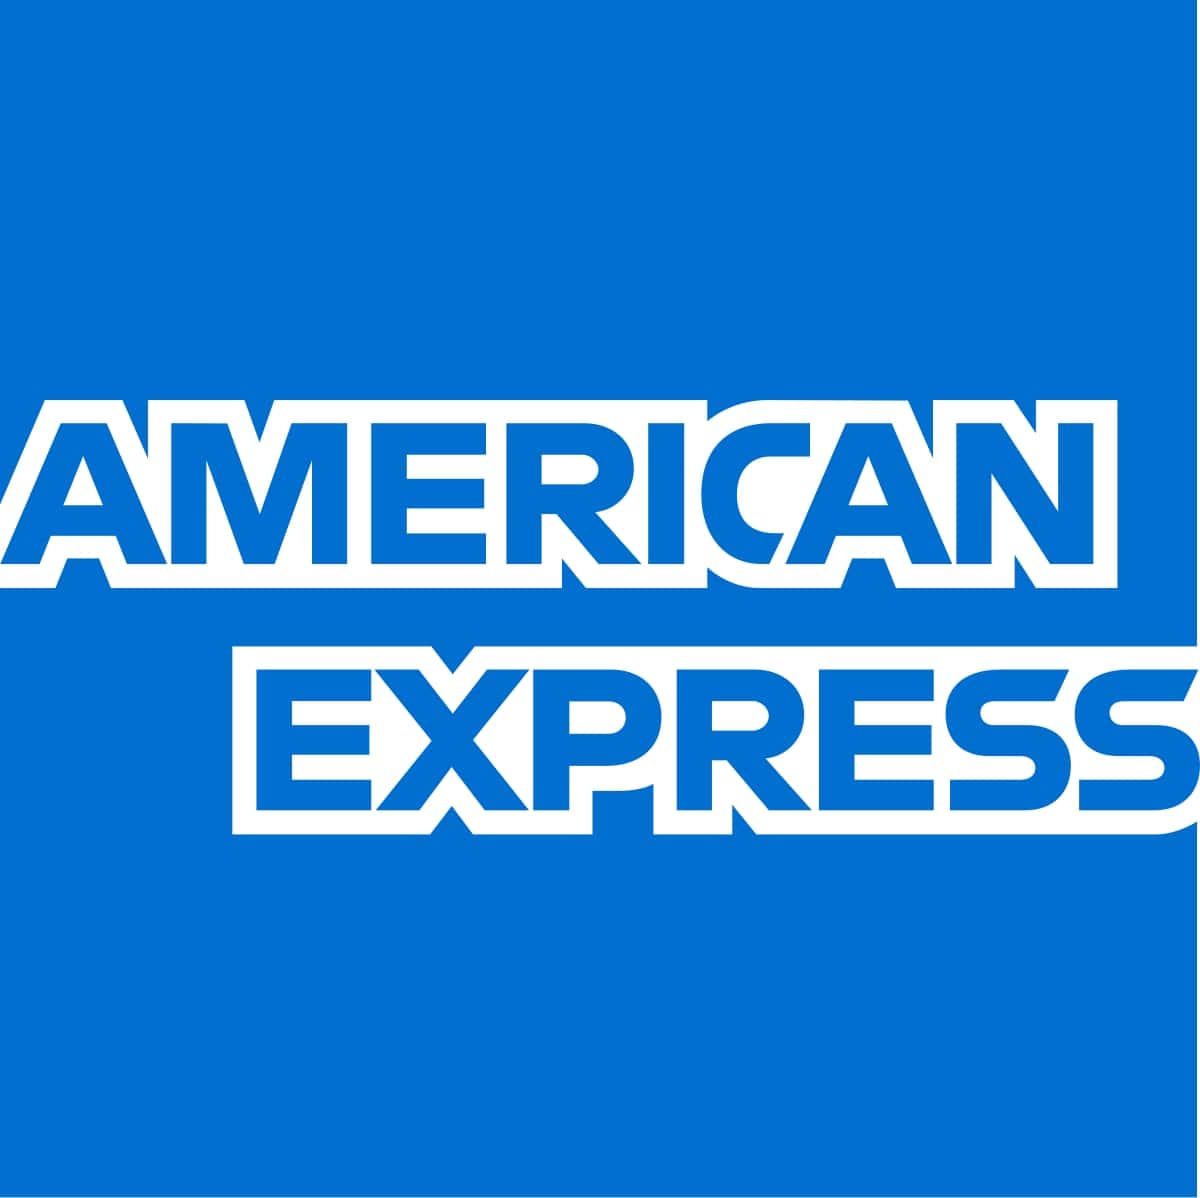 global travel services amex